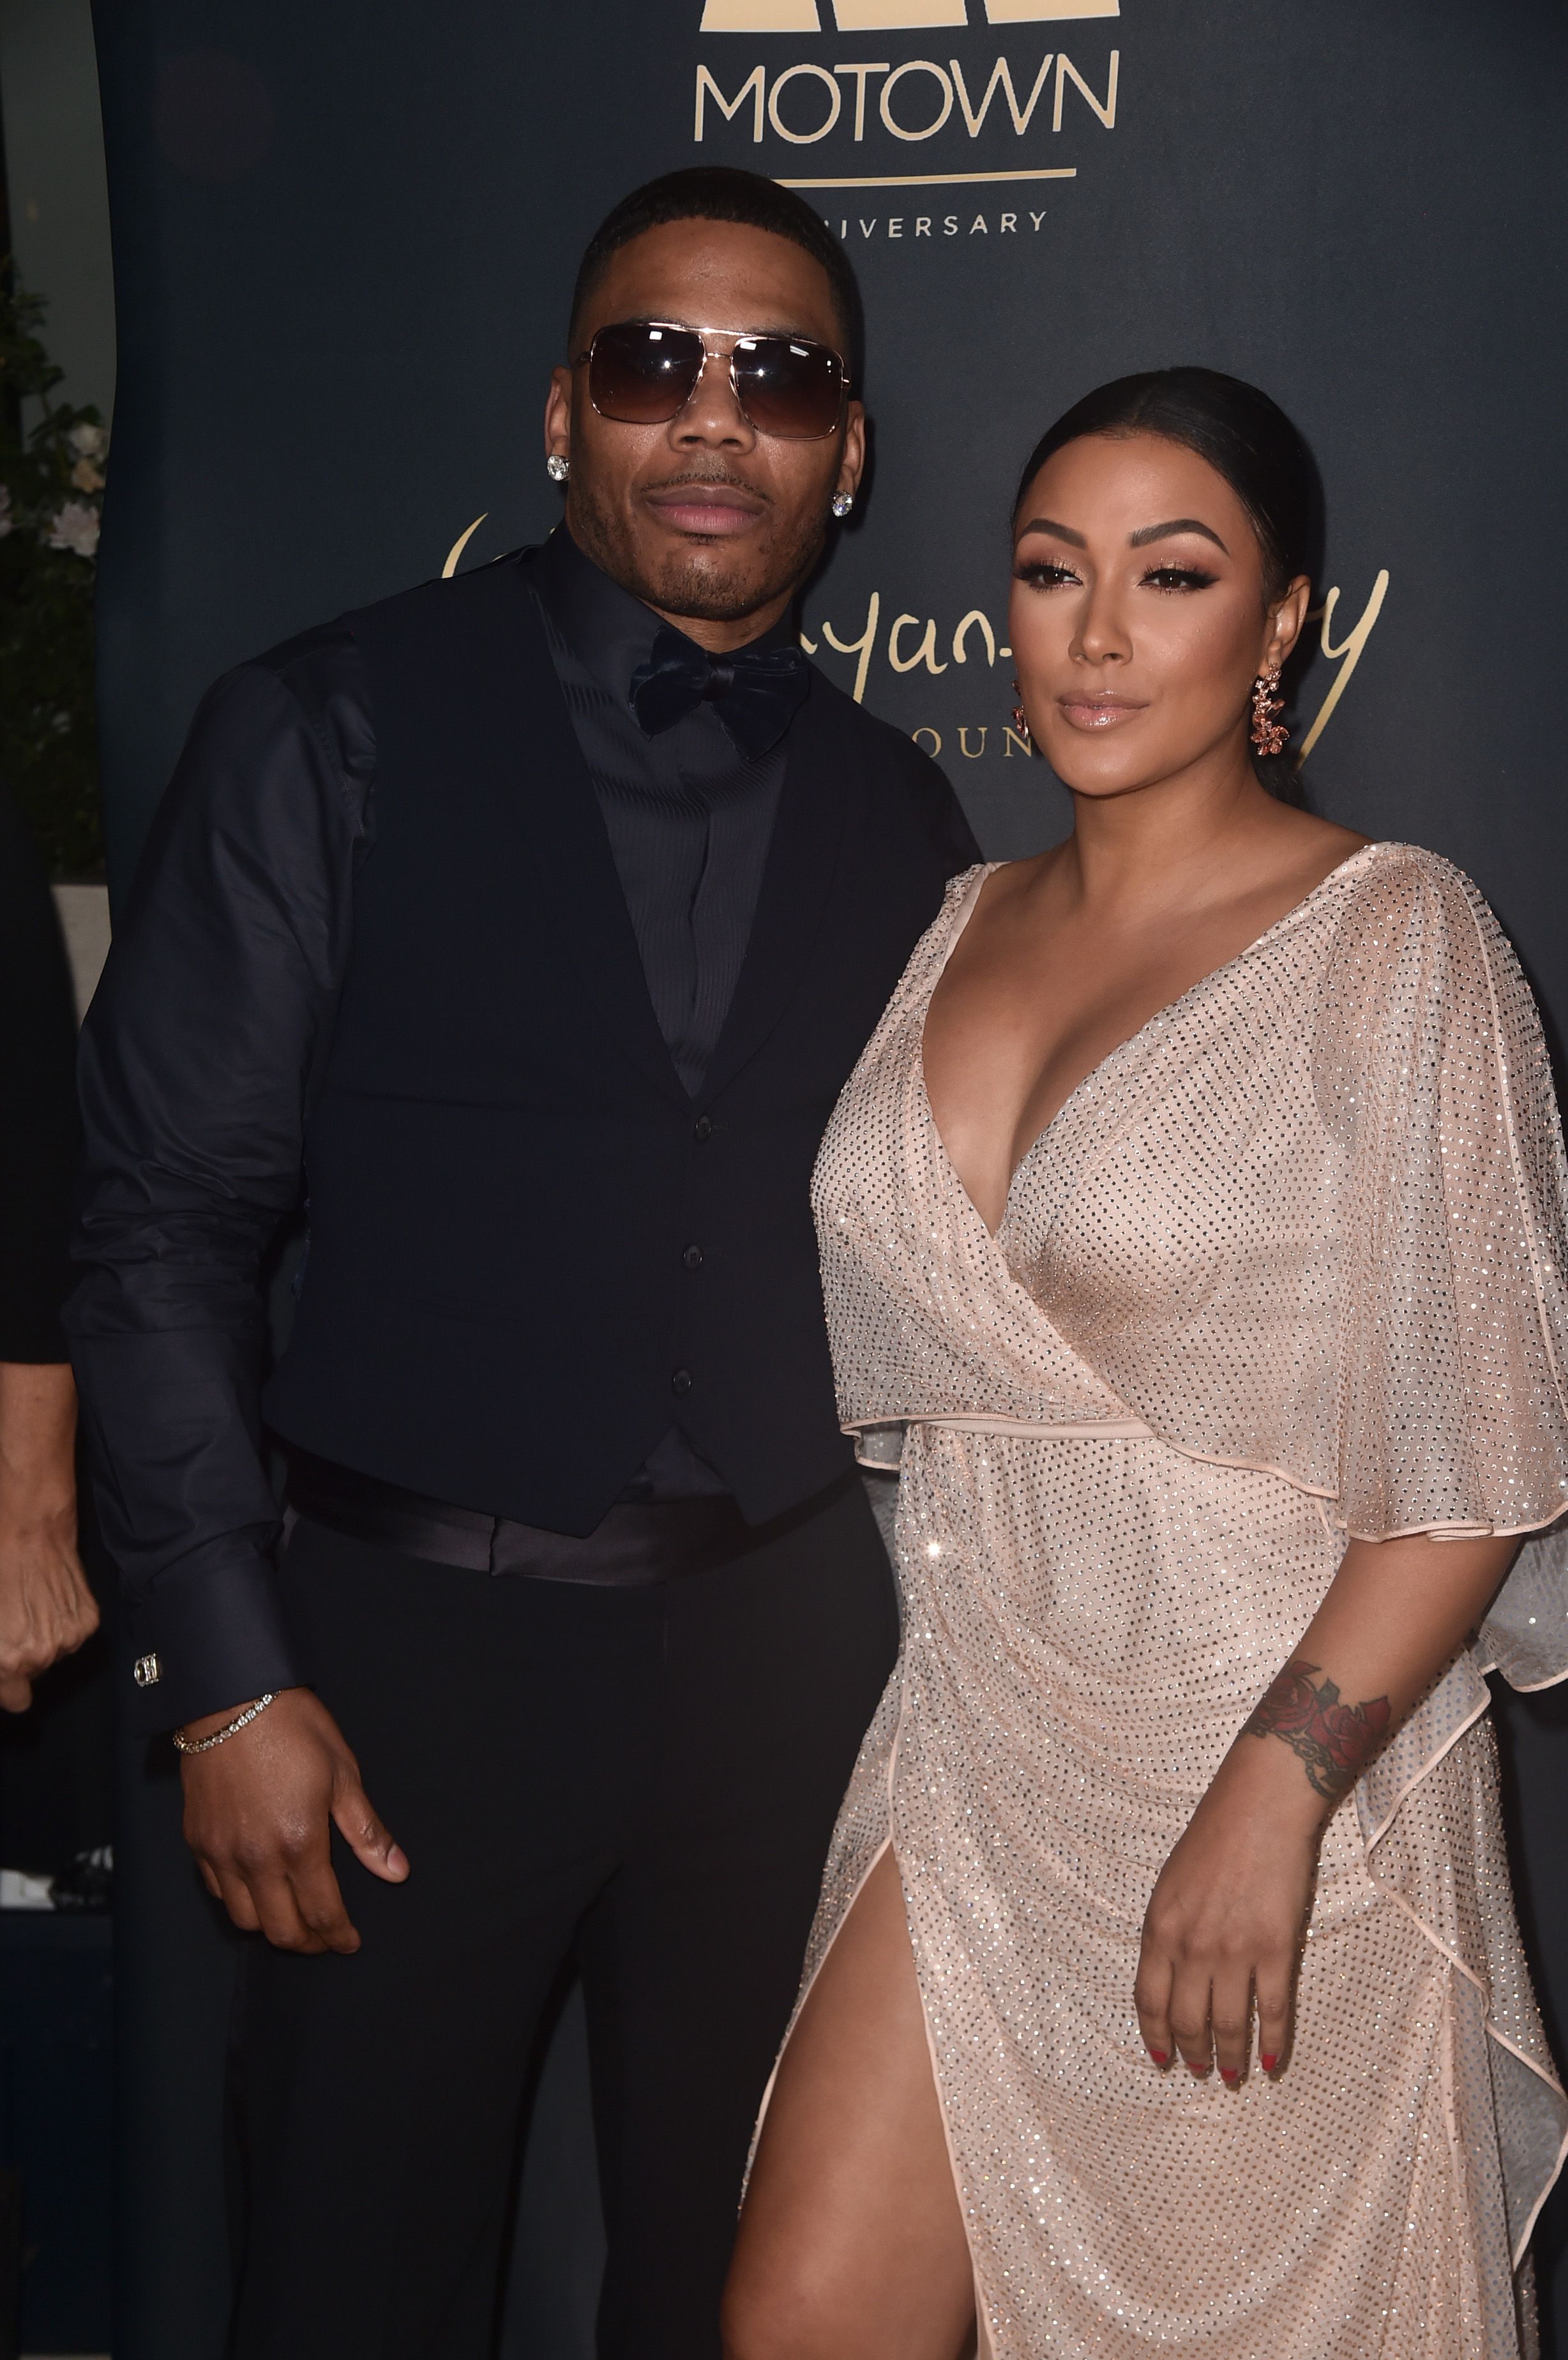 Nelly and Shantel Jackson at The Ryan Gordy Foundation Celebrates 60 Years Of Mowtown on November 11, 2019. | Photo: Getty Images